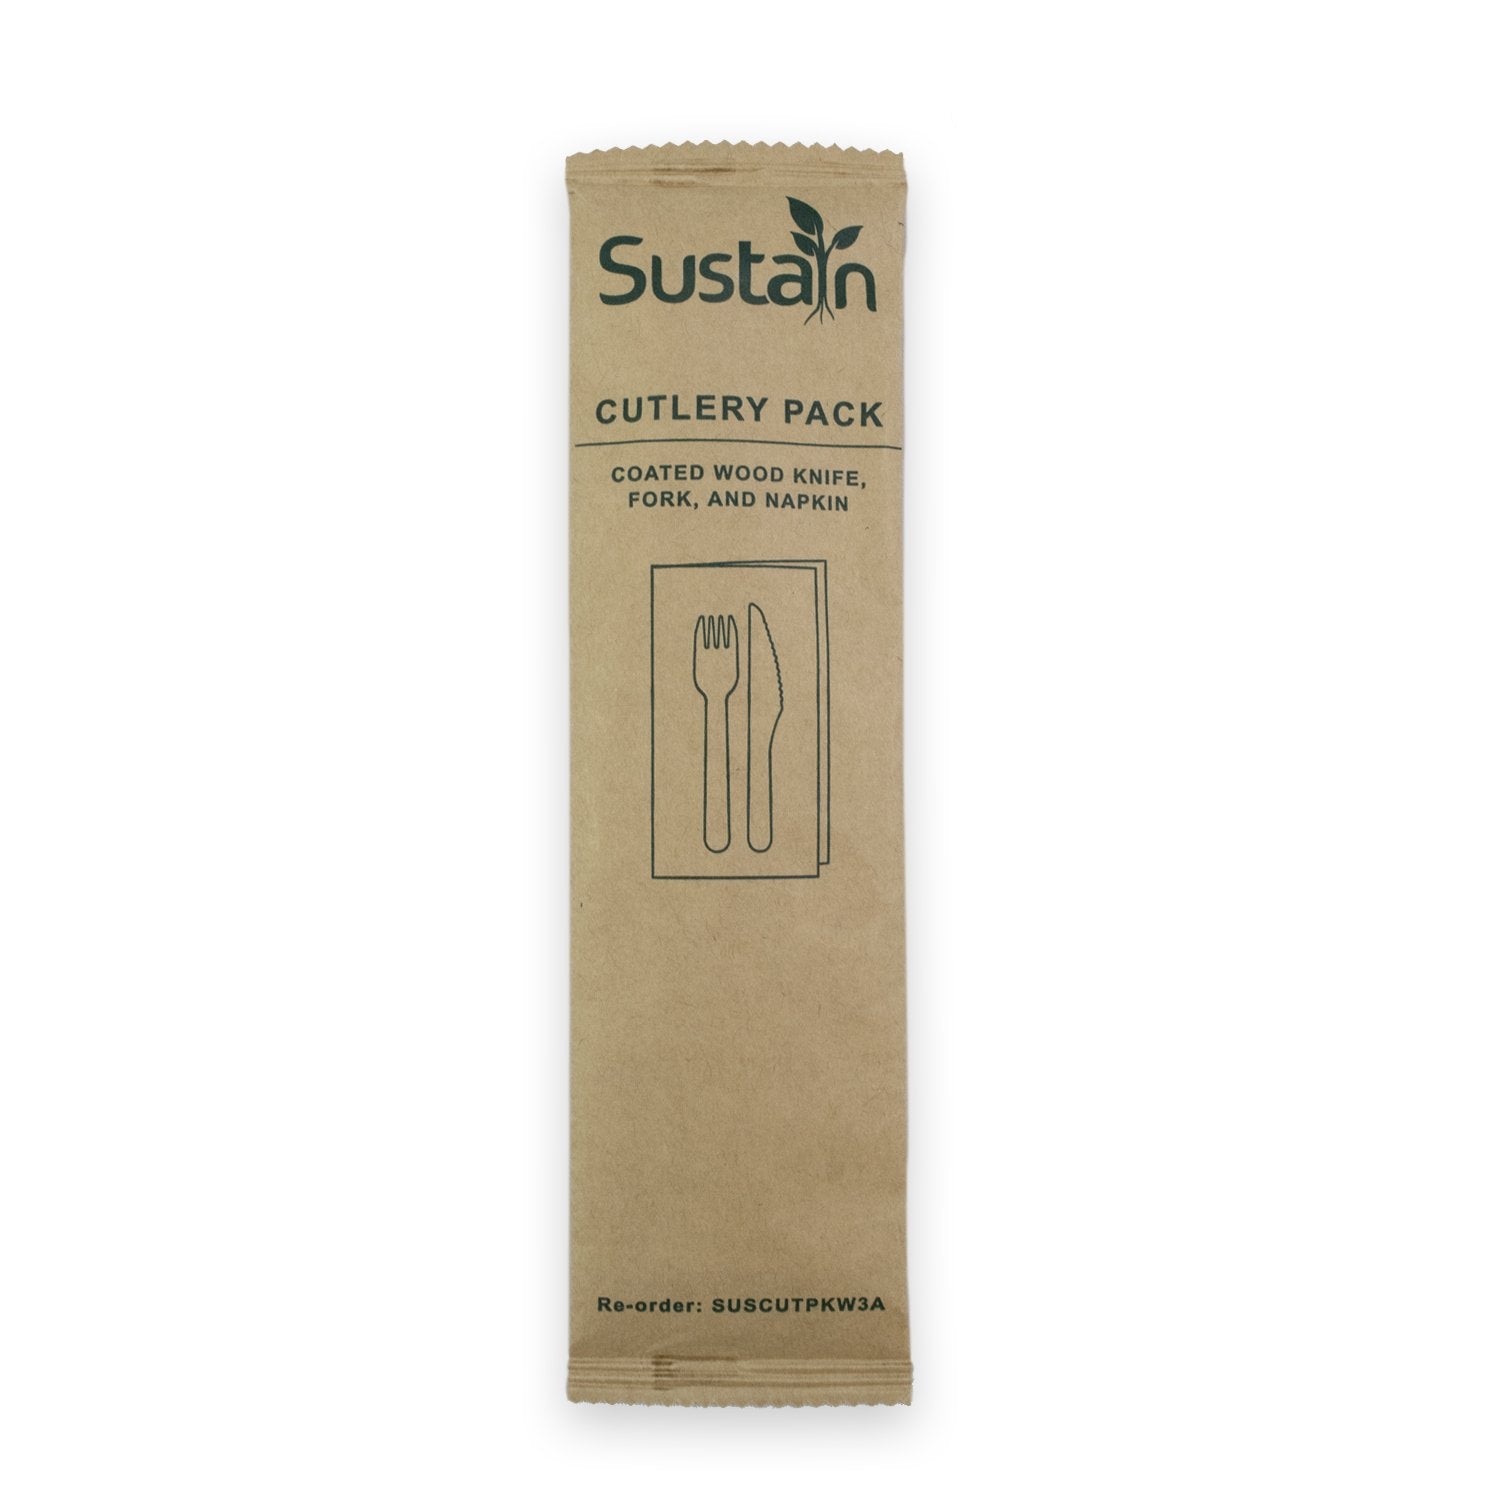 Sustain Sustain Wooden Cutlery Pack with Fork, Knife, Napkin - CT/400 Bags & Takeaway Carton of 400 